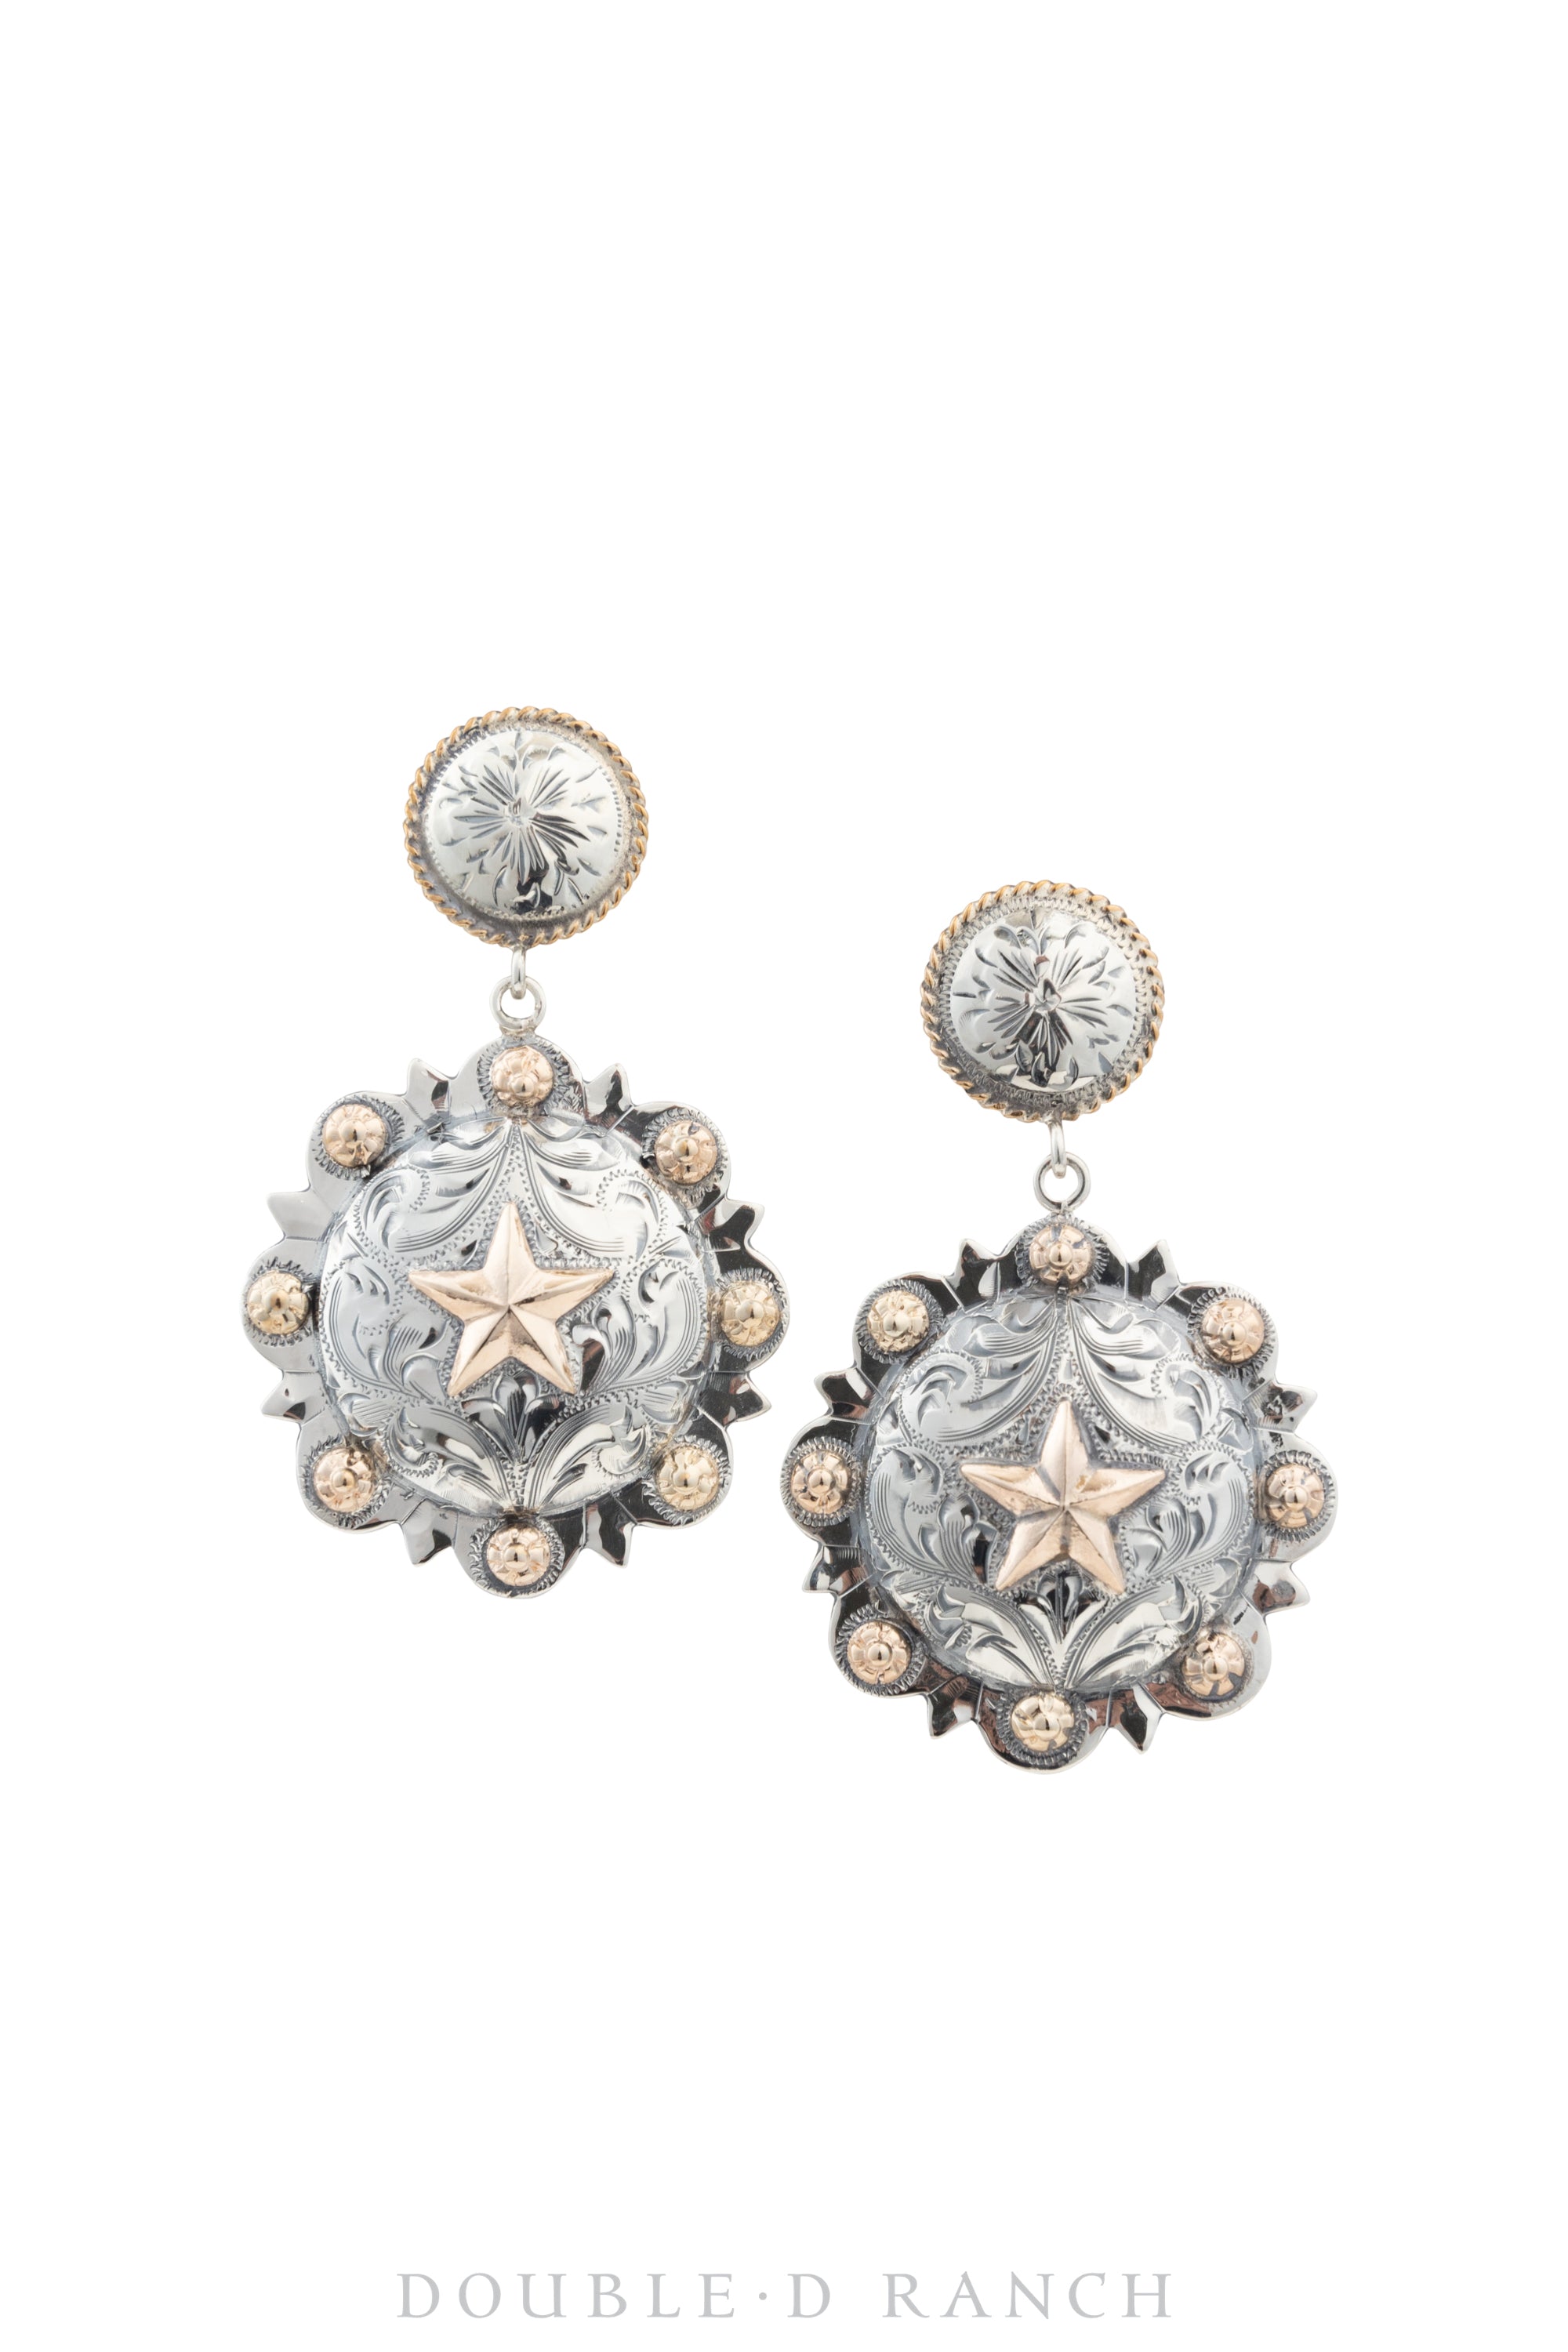 Earrings, Concho, Western Engraved, Bronc, Contemporary, 1297